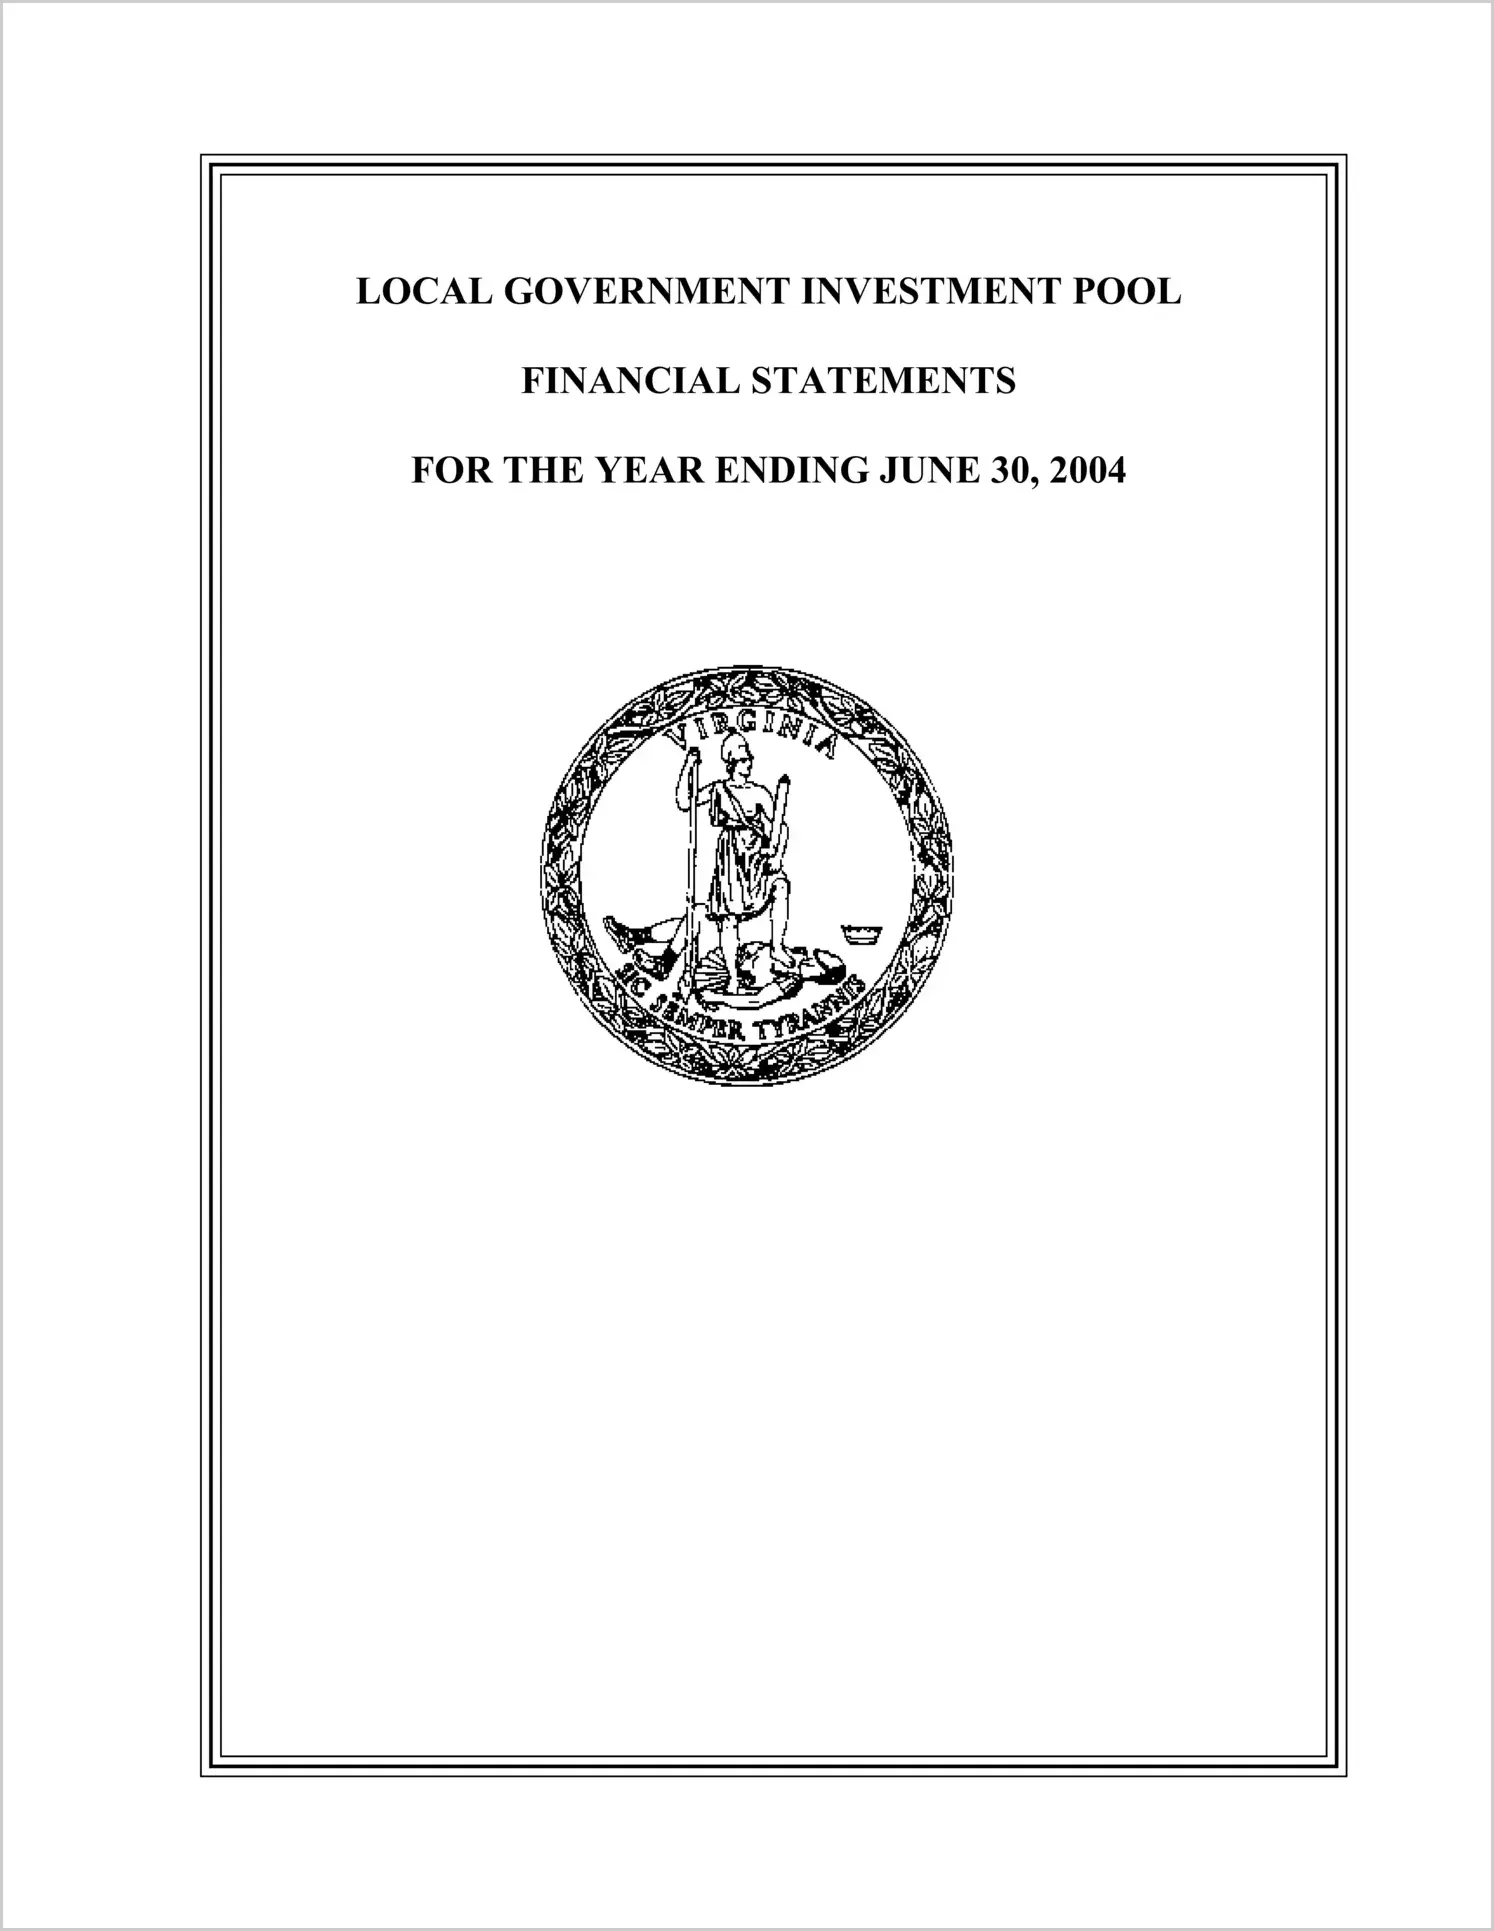 Local Government Investment Pool for the year ended June 30, 2004